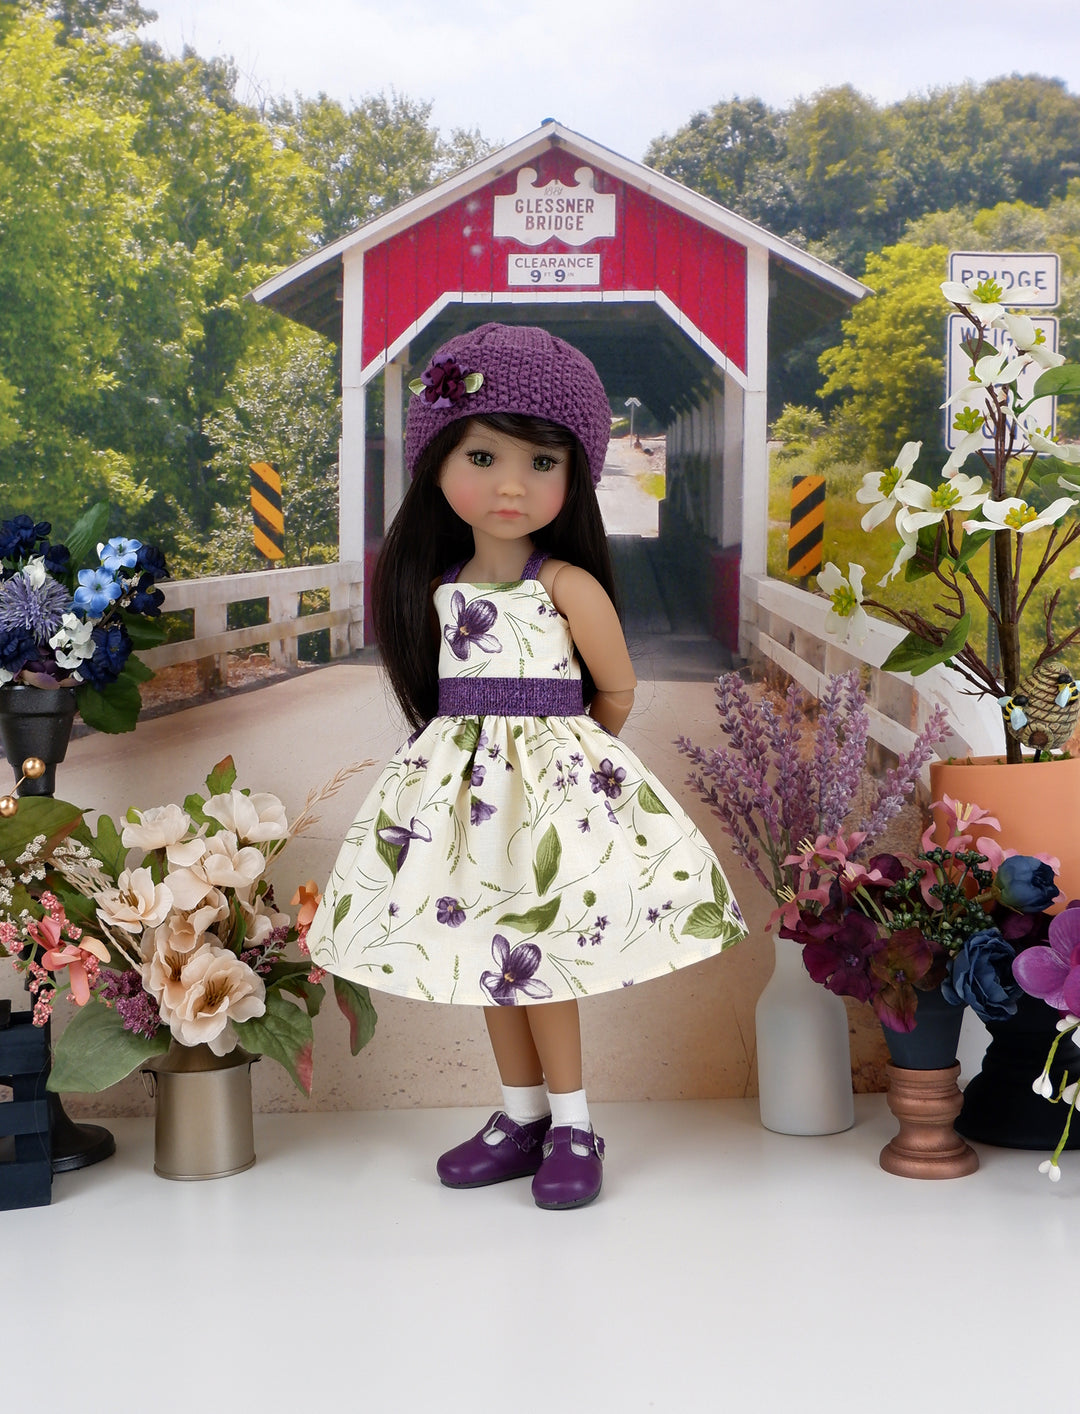 Wild Meadow - dress and sweater set with shoes for Ruby Red Fashion Friends doll